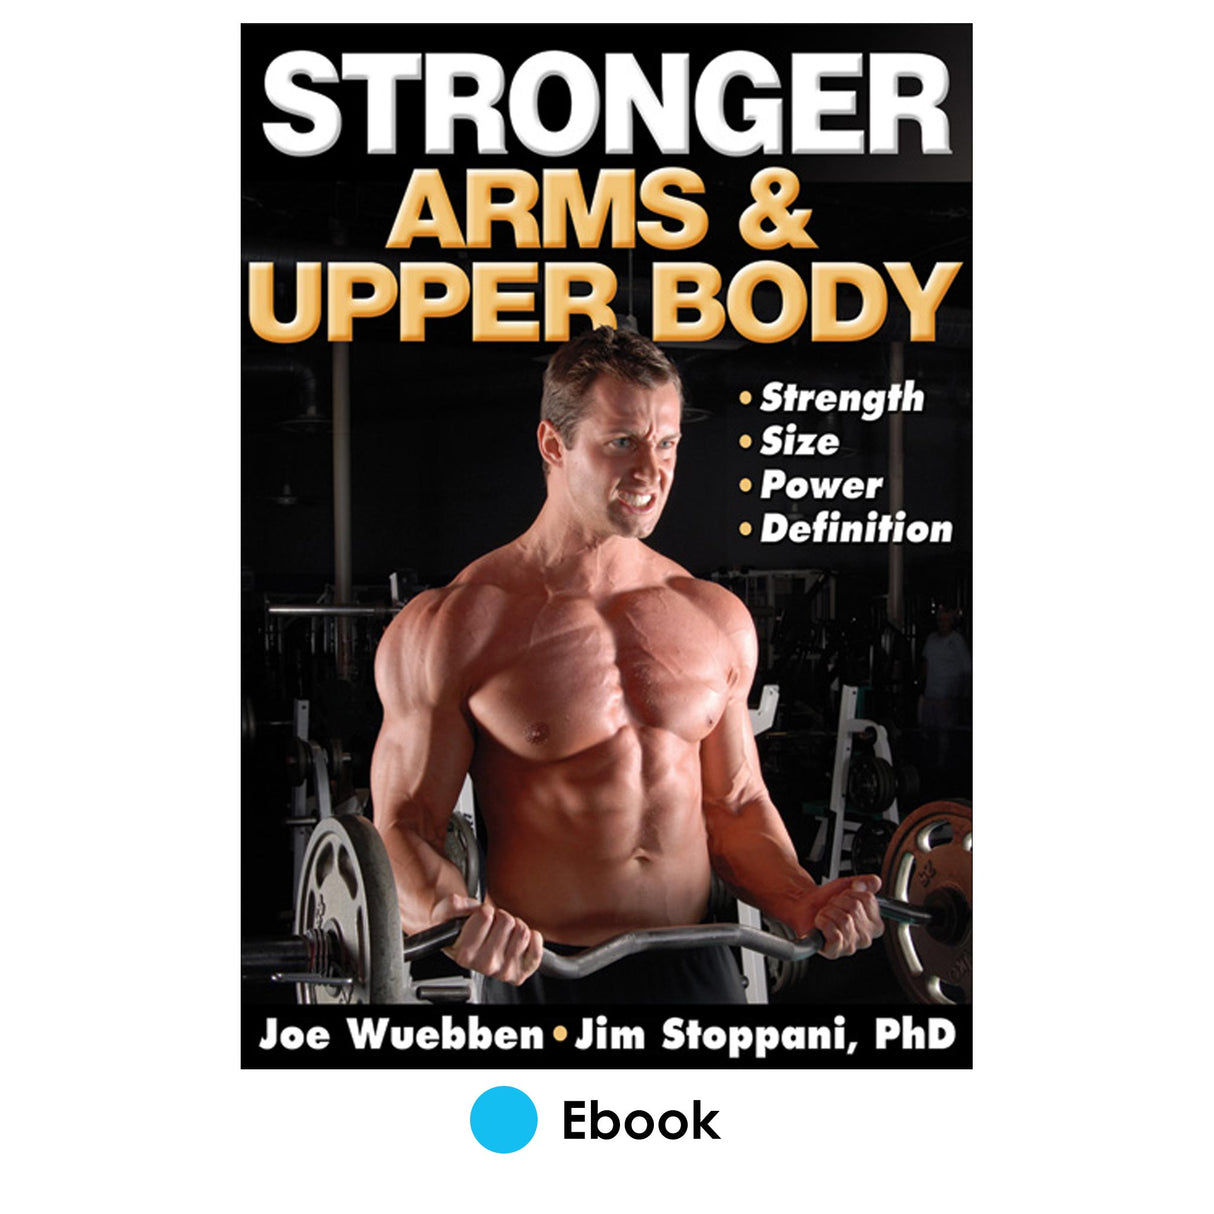 Stronger Arms & Upper Body PDF